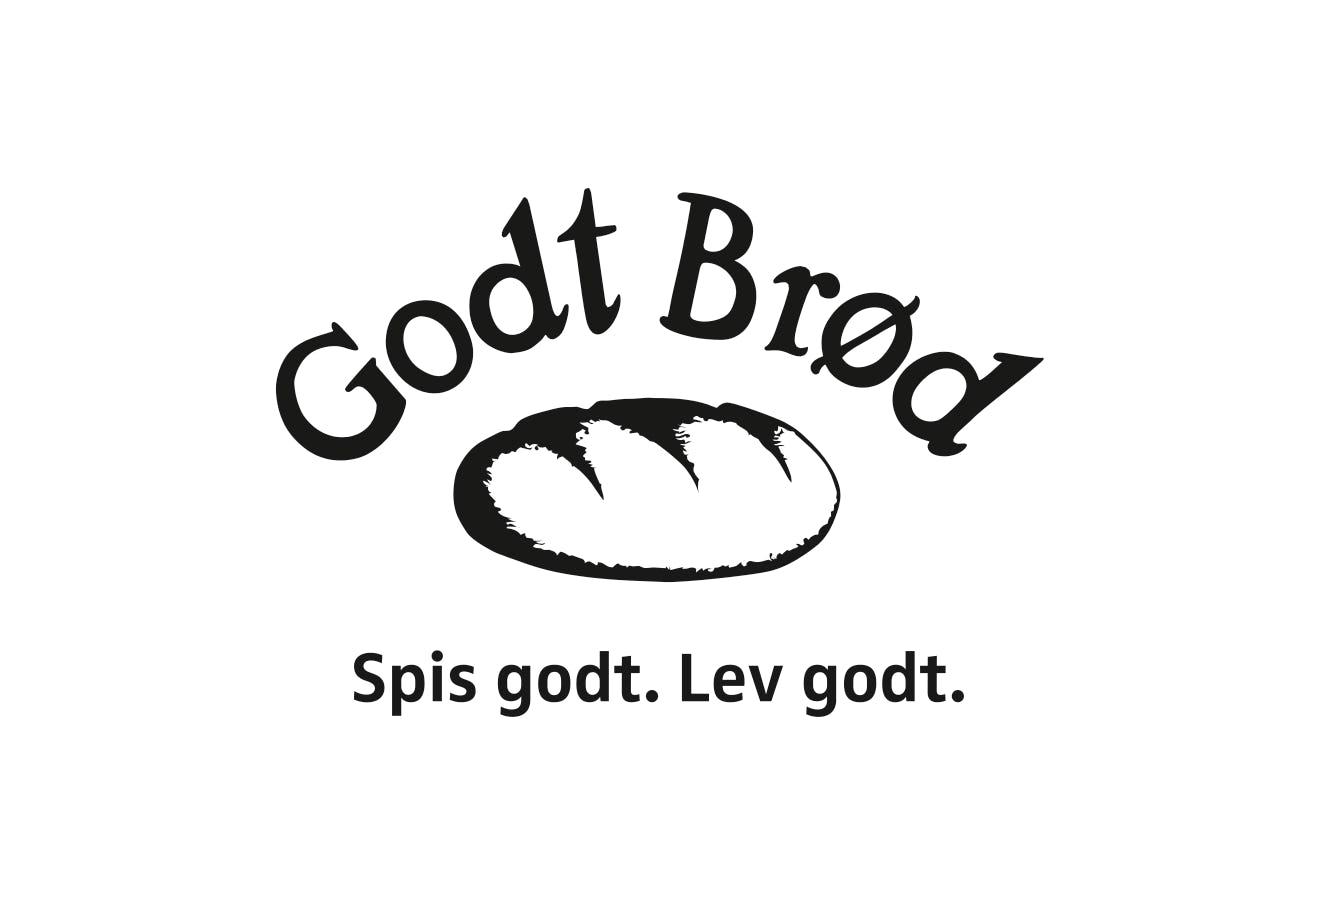 Work up your appetite with Godt Brød.